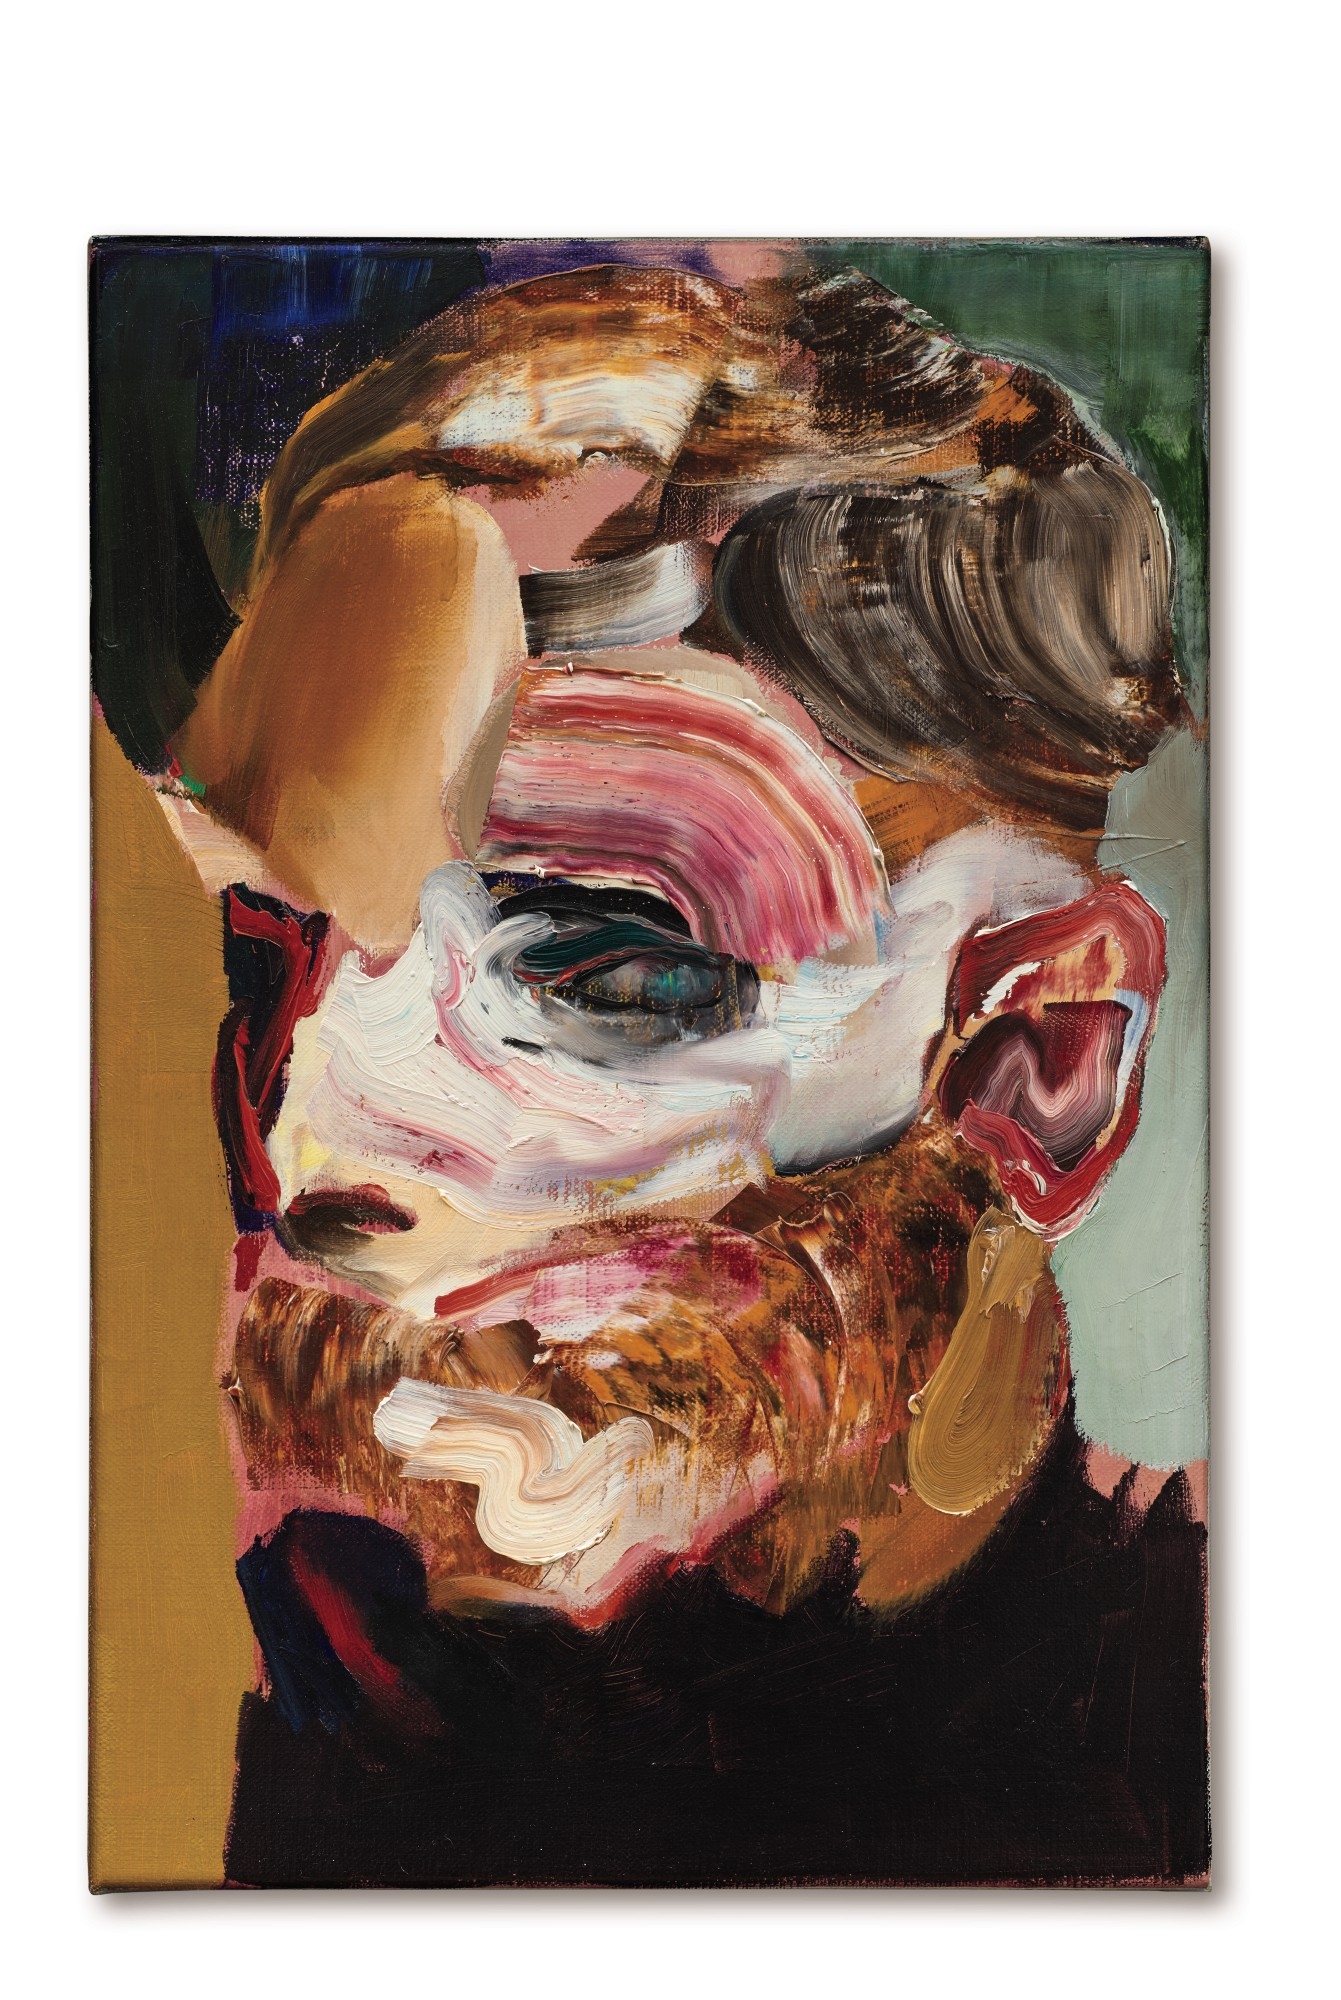 Artwork by Adrian Ghenie, Self-Portrait in  年的自畫像, Made of oil on canvas